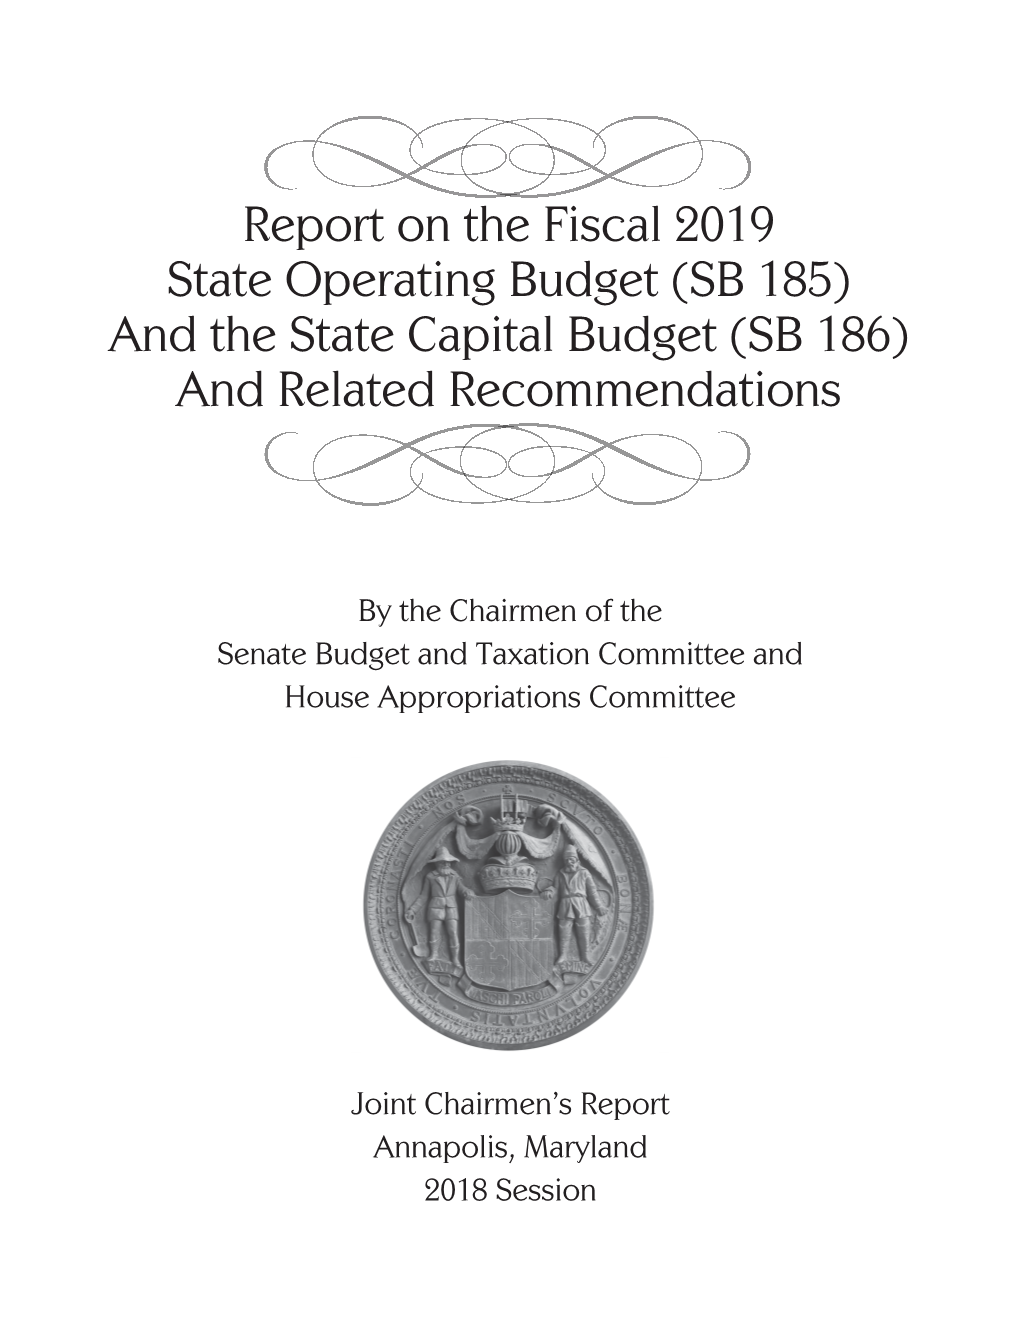 Report on the Fiscal 2019 State Operating Budget (SB 185) and the State Capital Budget (SB 186) and Related Recommendations